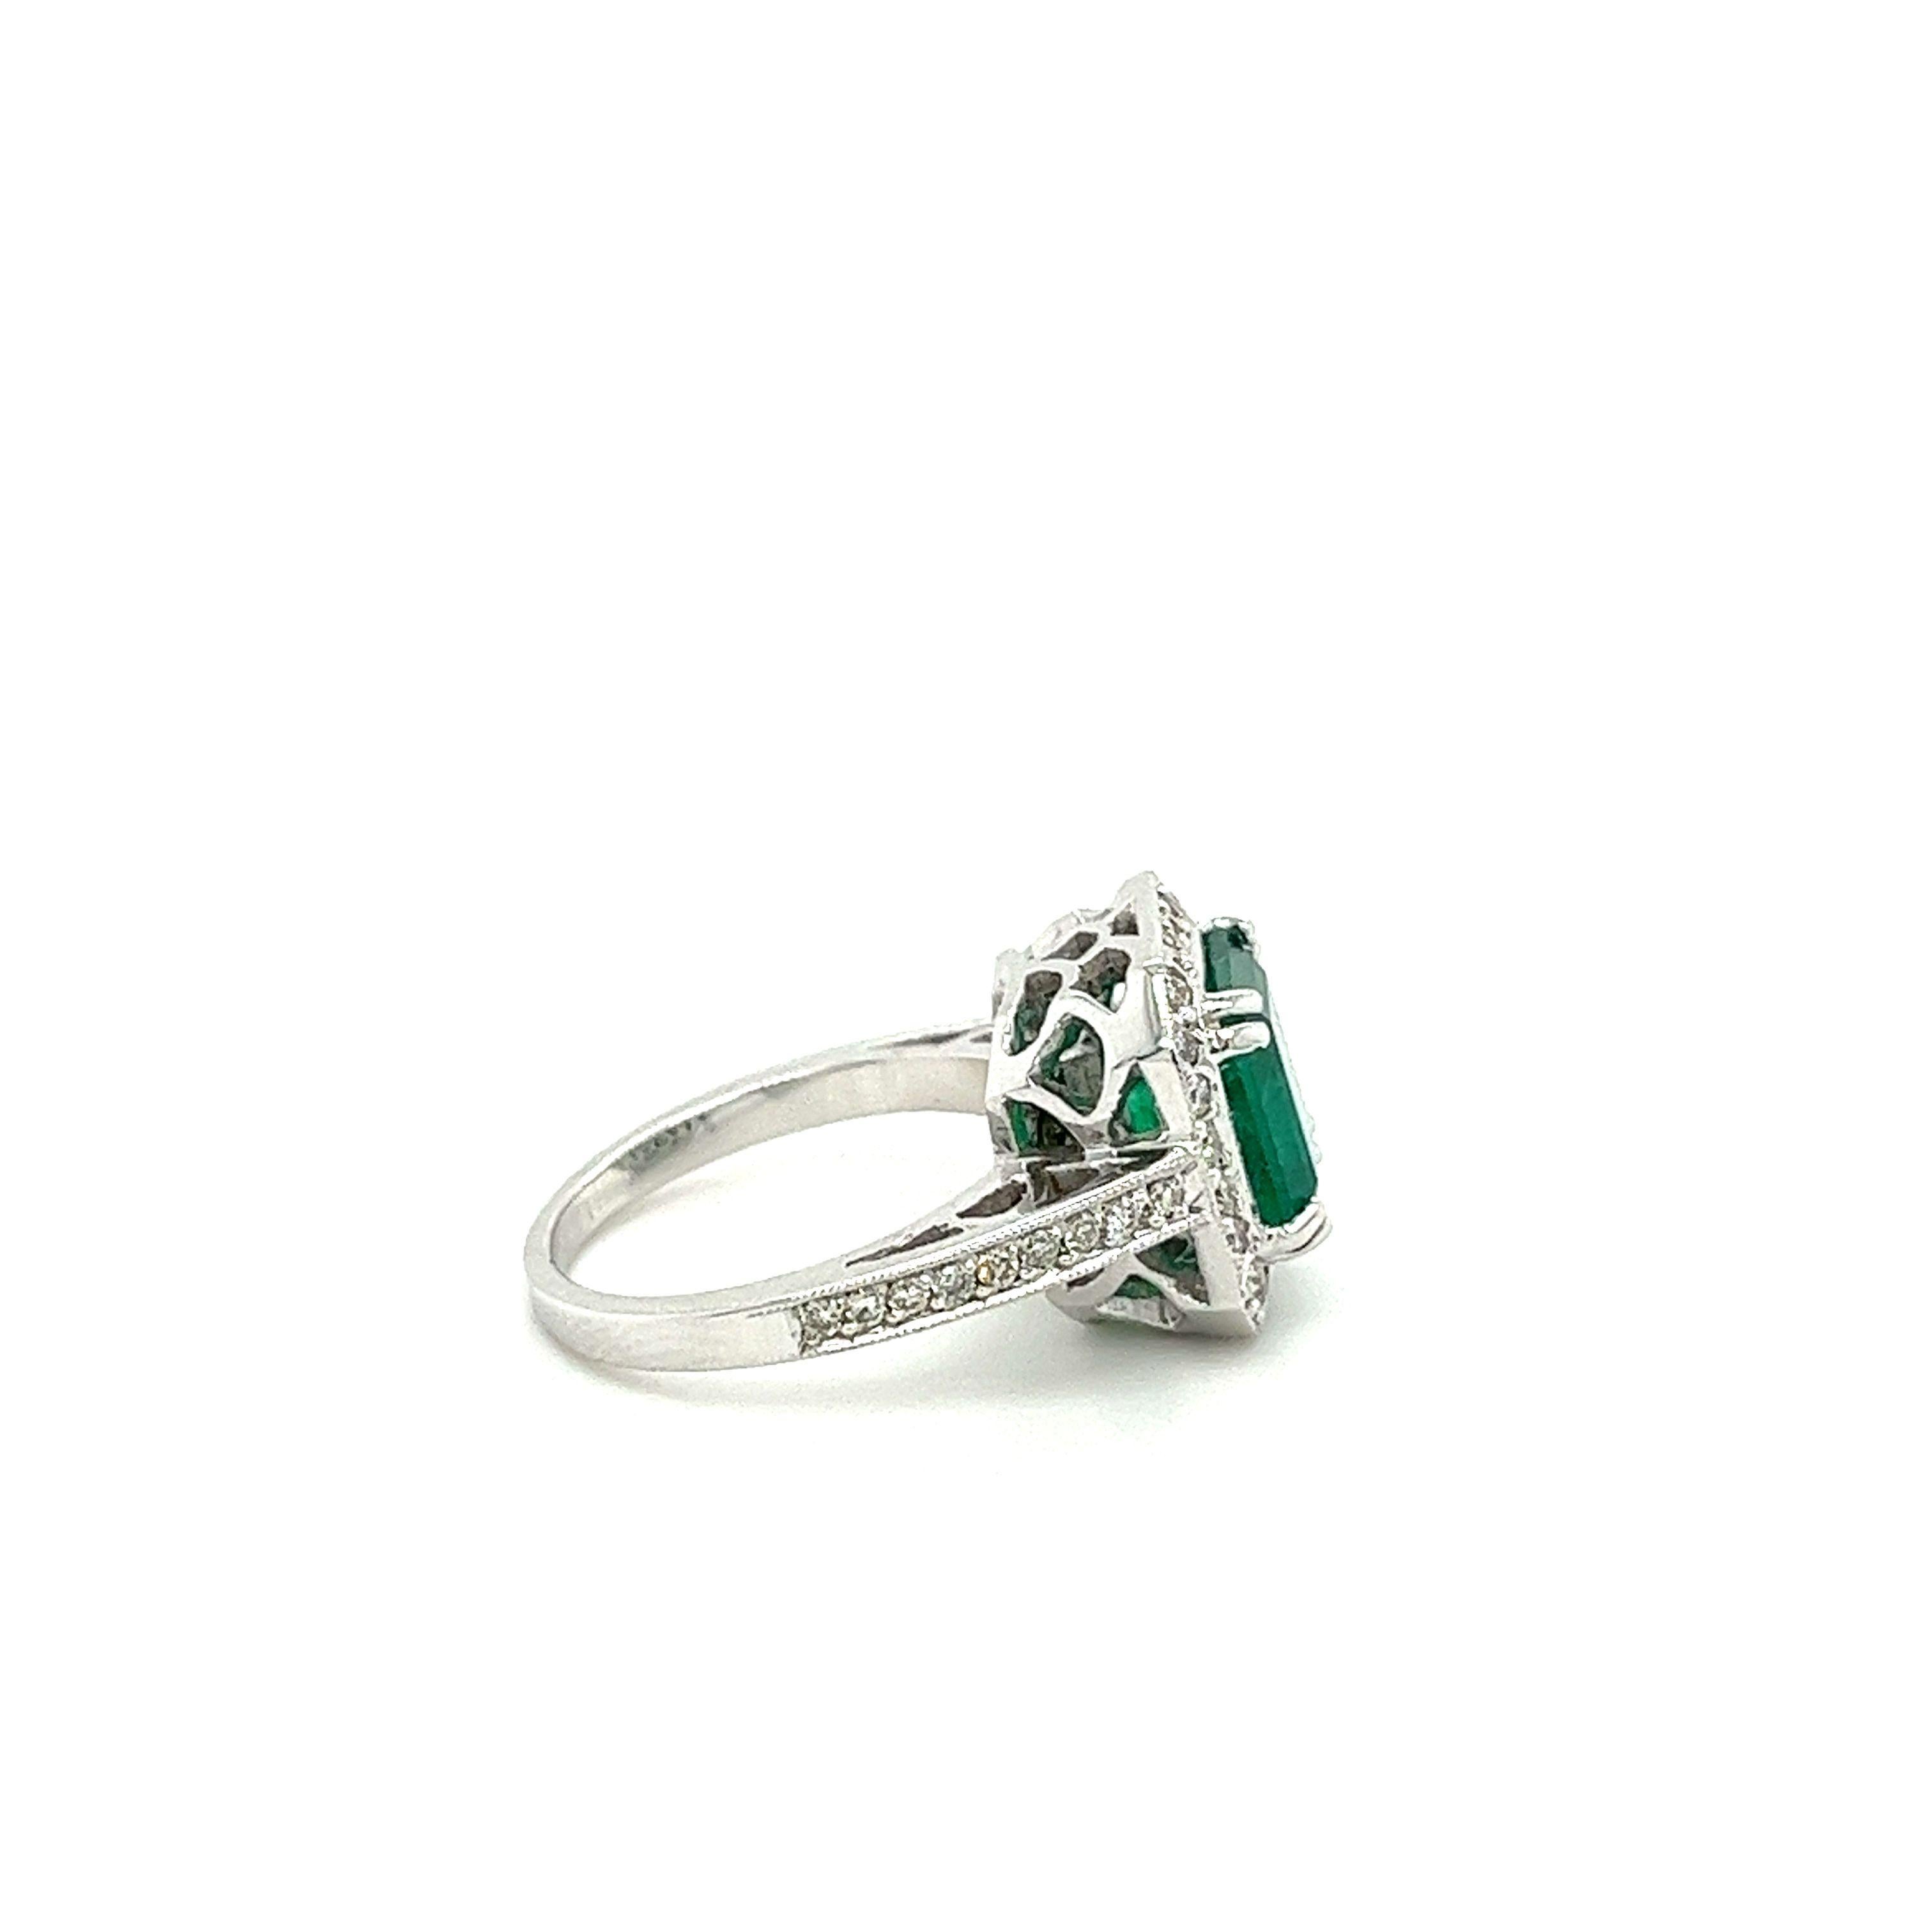 3-carat Colombian emerald ring, set in 18k white gold. This remarkable gemstone bears a rich, dark green color with exceptional luster, brilliance, and transparency. 42 round cut diamonds are perfectly placed around the emerald, forming a sparkling